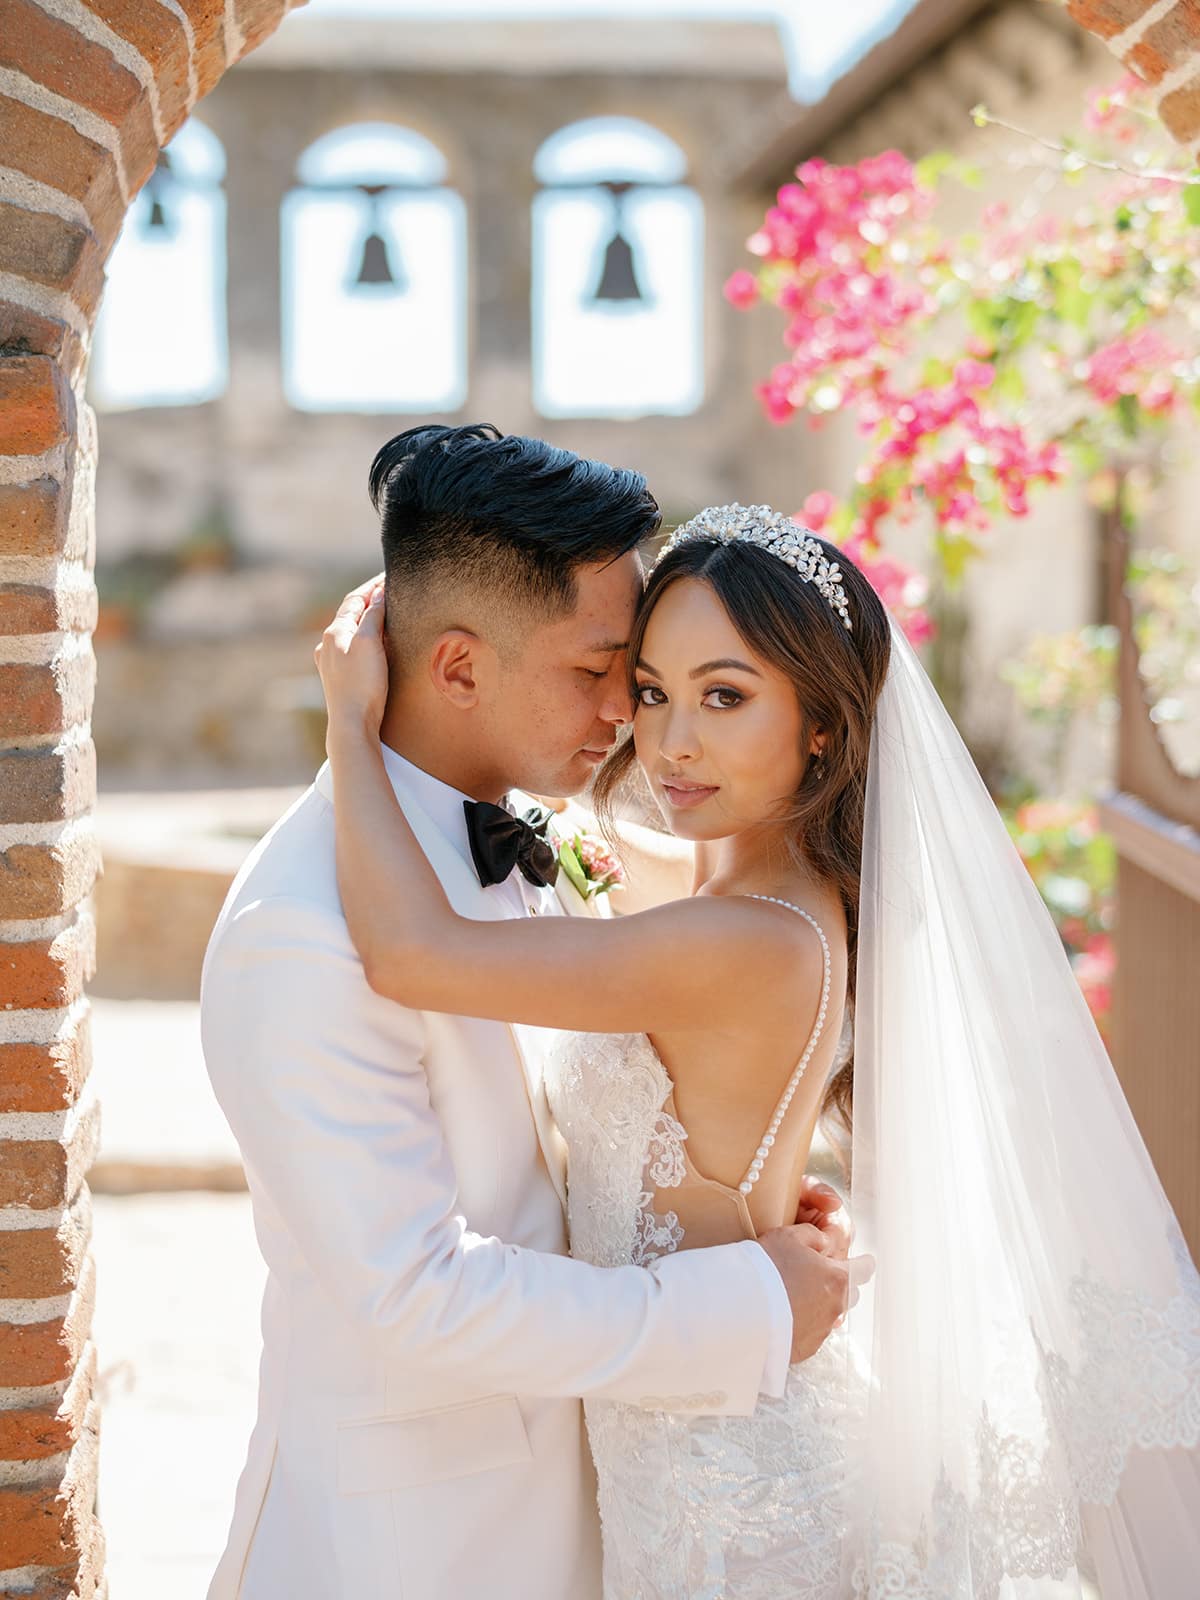 Close-up of a bride and groom embracing with the bride locking eyes with the camera and a touch of pink florals framing them